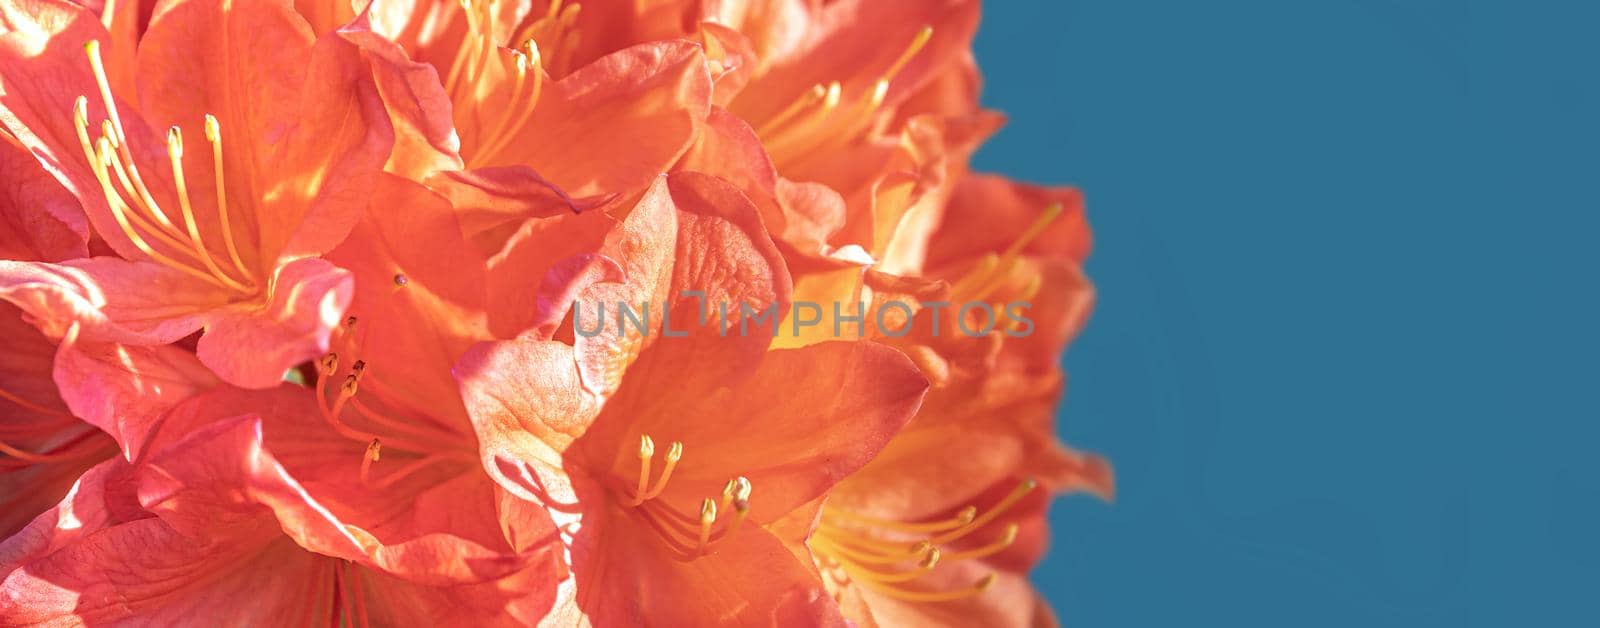 Beautiful outdoor floral background. Bush of delicate orange flowers of azalea or Rhododendron plant in a sunny spring day